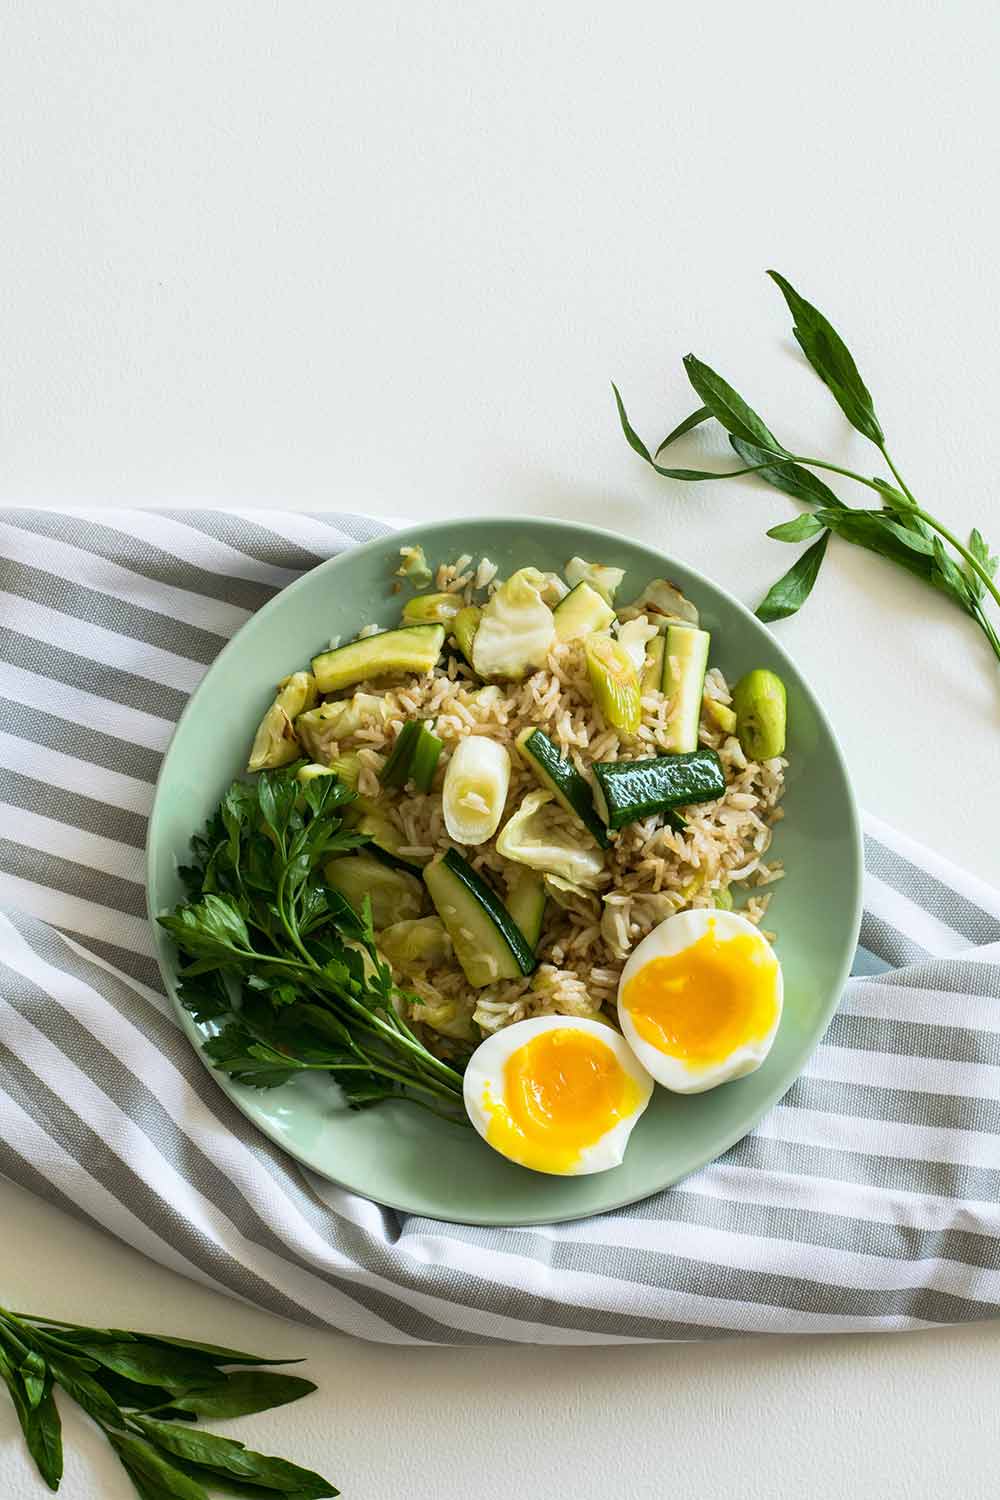 Green plate with rice, zucchini, greens and an egg on top of a striped kitchen towel with greenery around it.